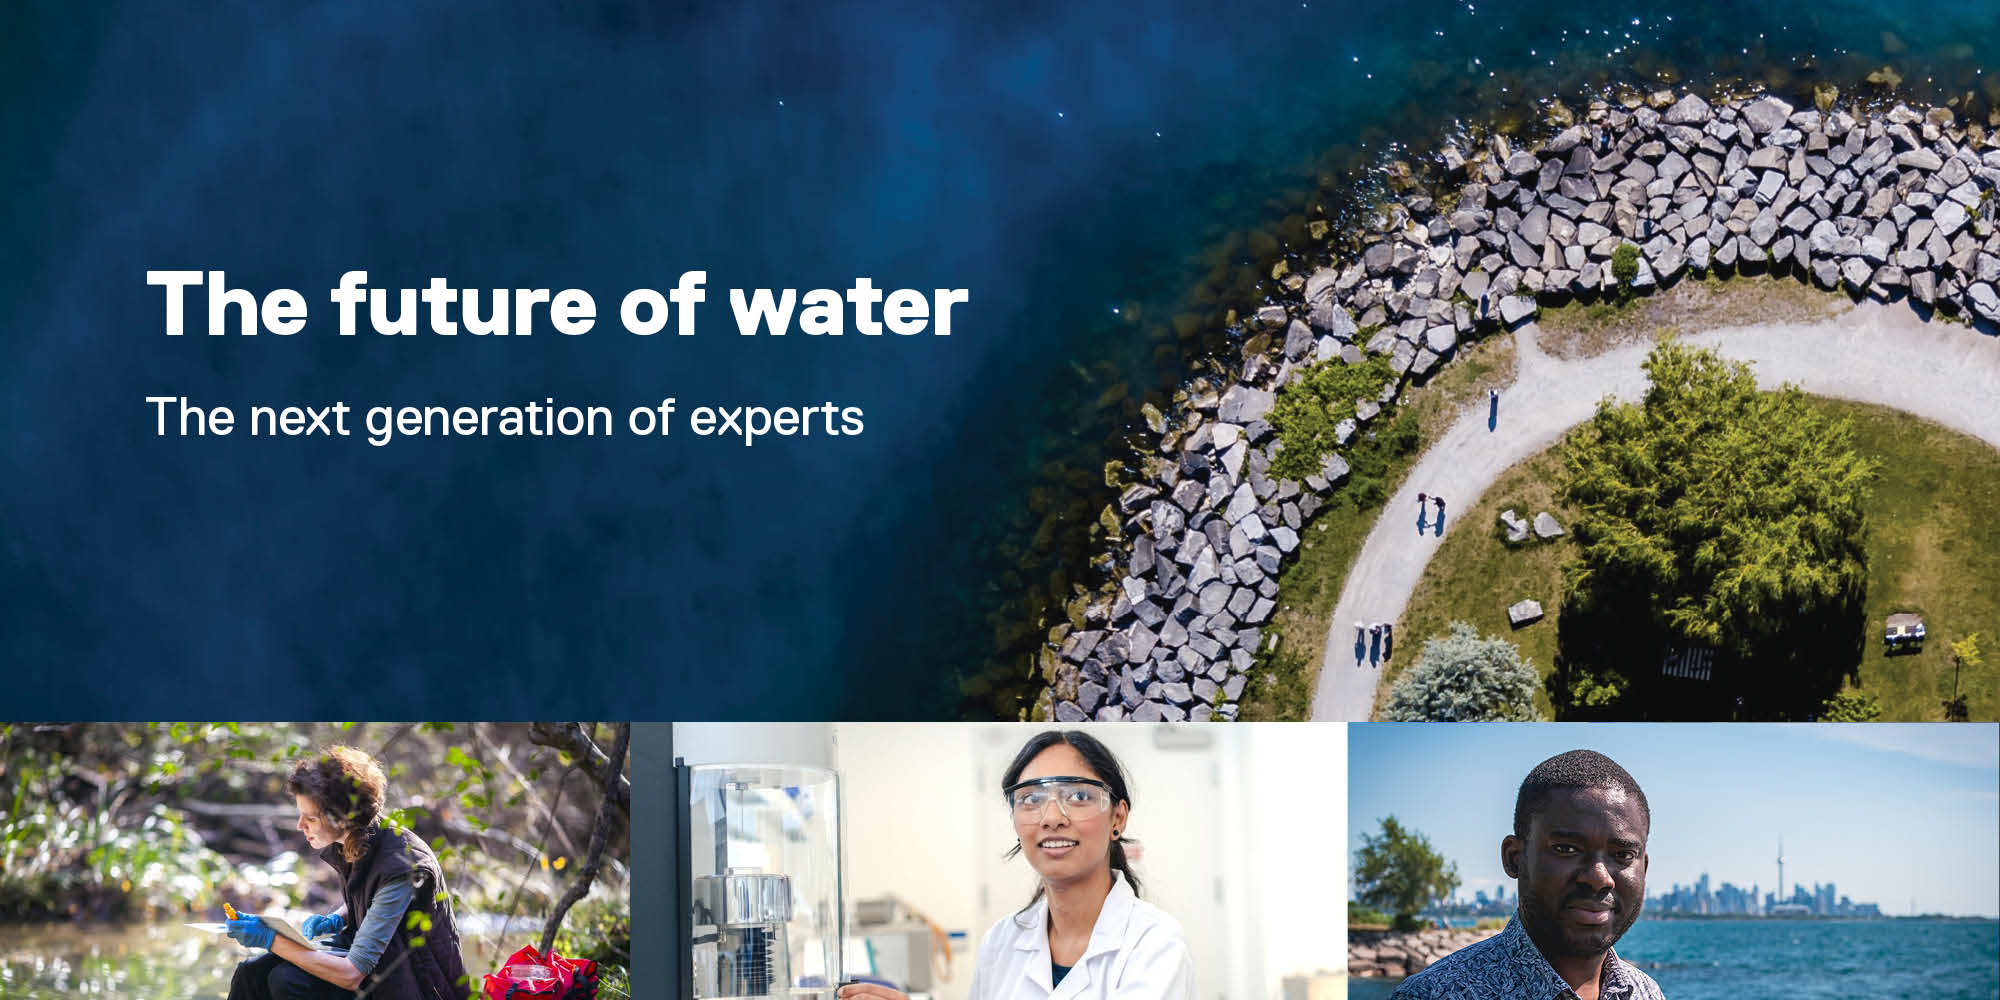 The future of water: The next generation of experts